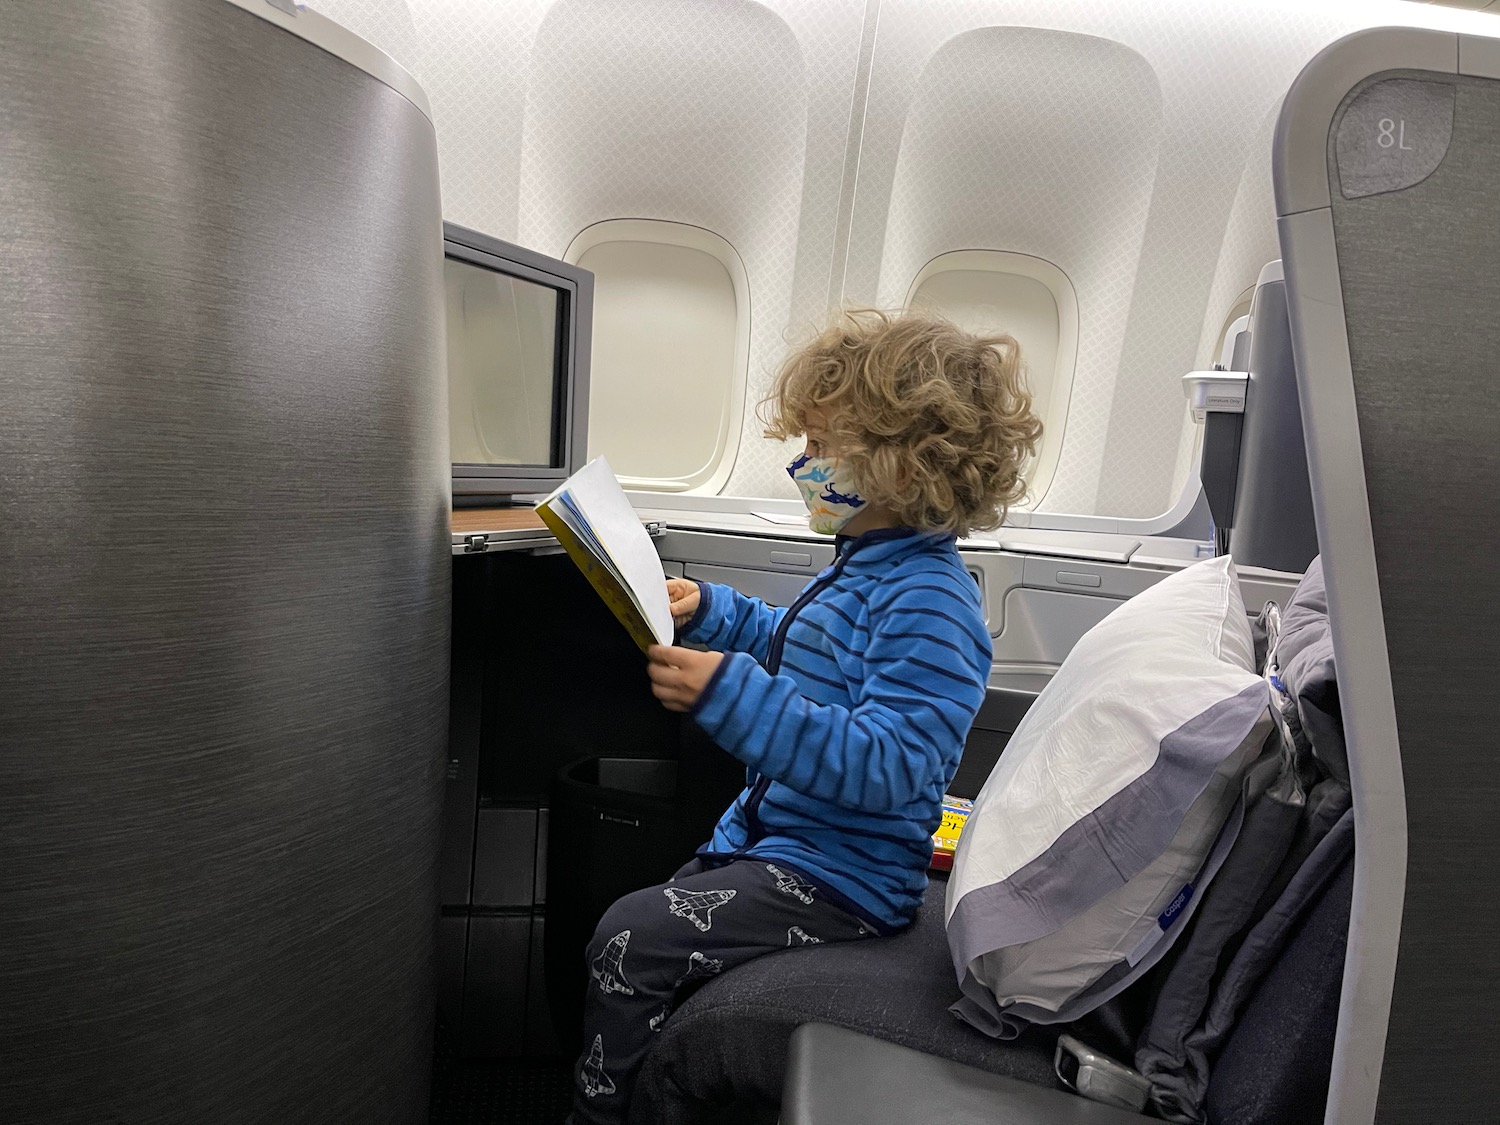 a child sitting on an airplane reading a book